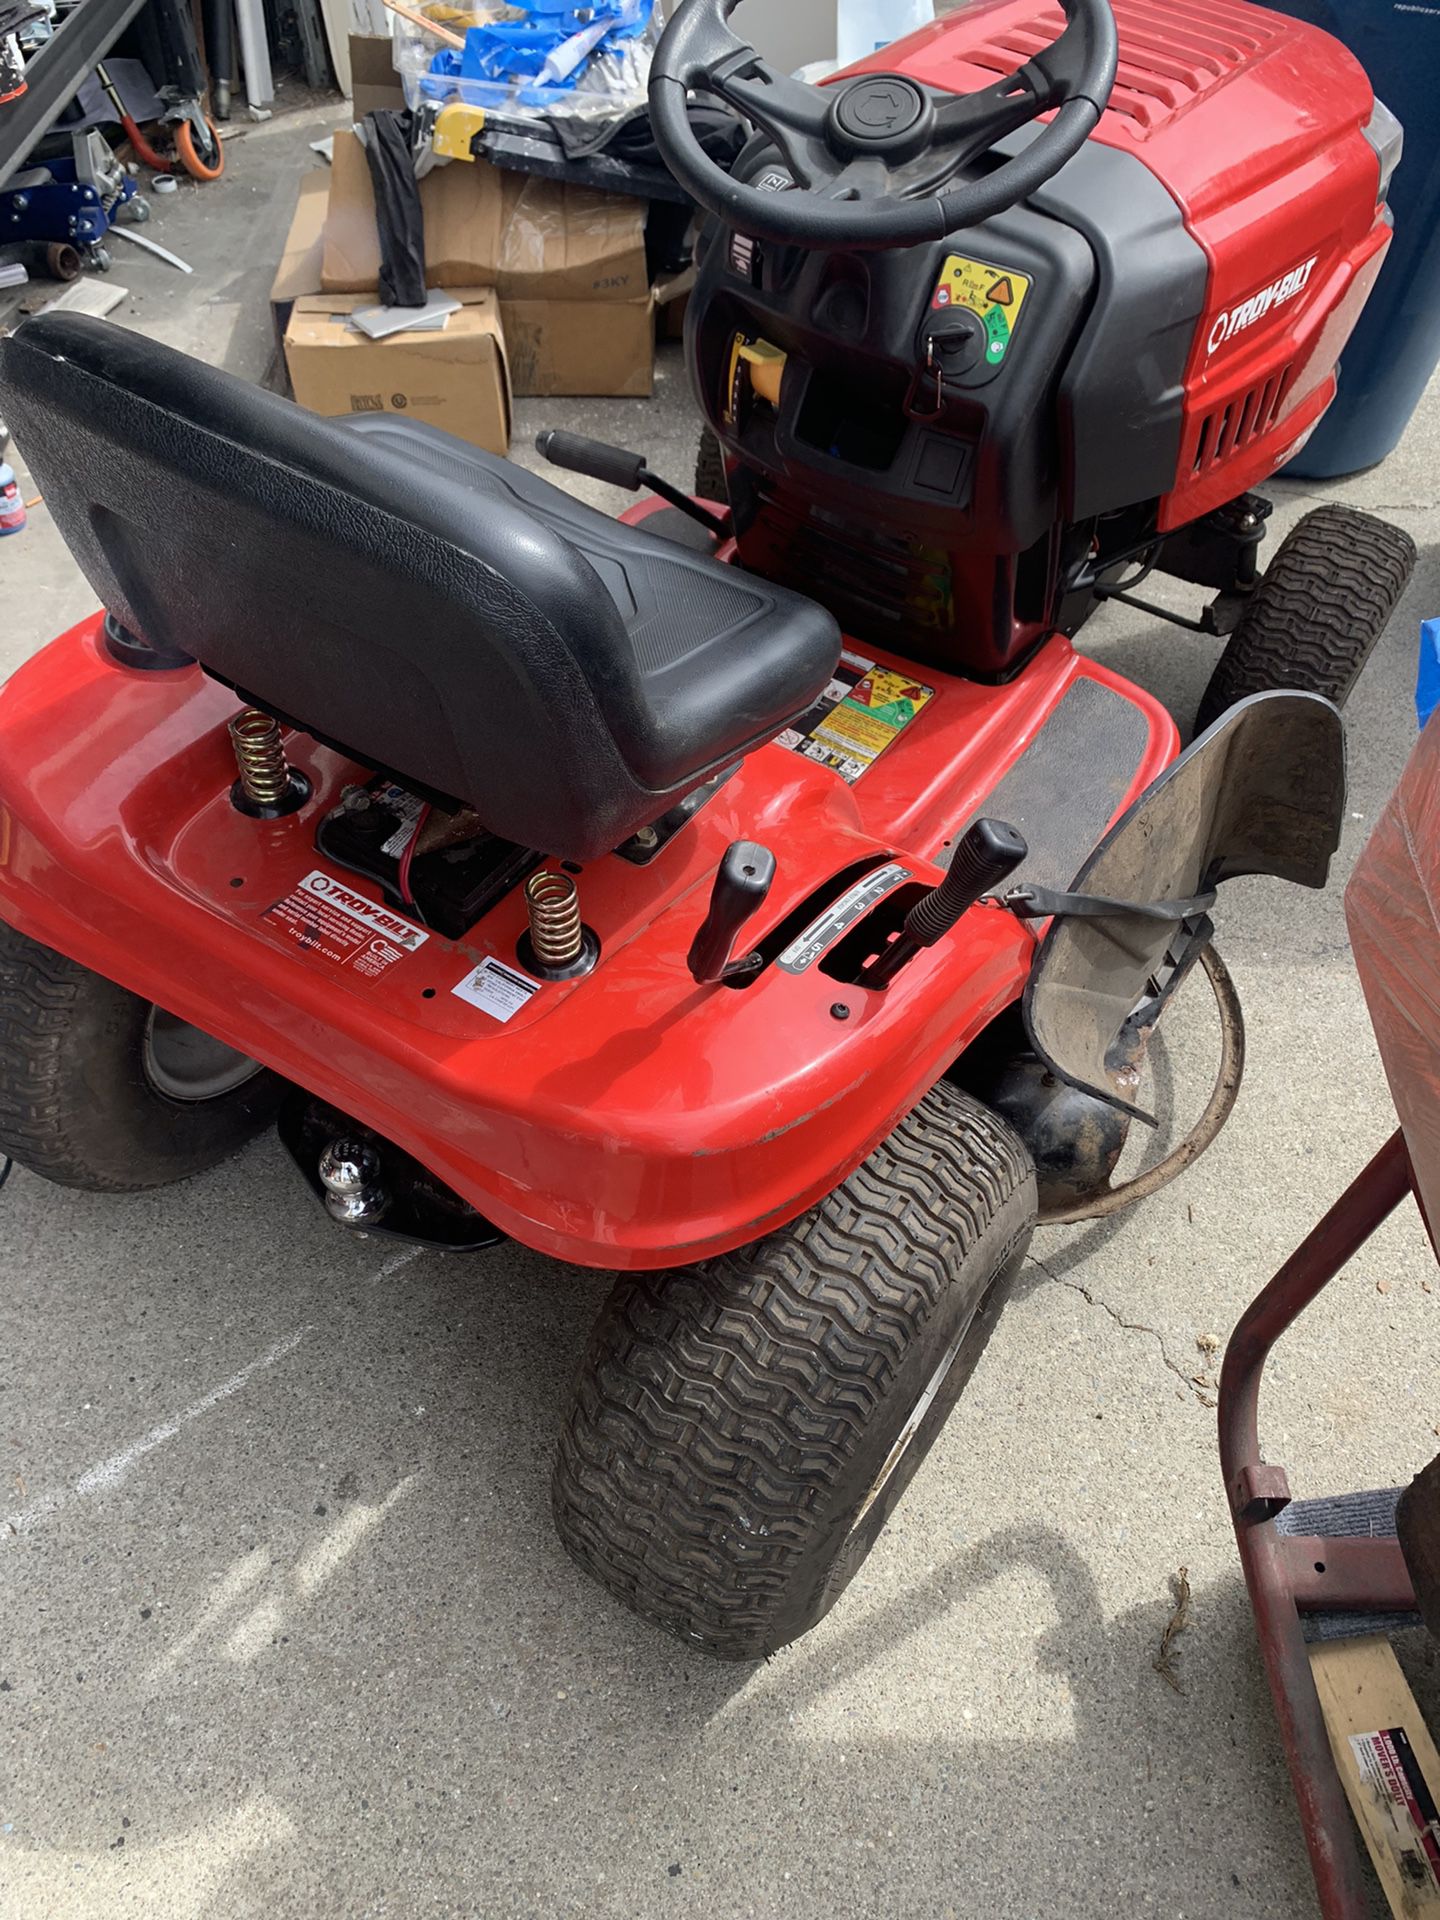 2019 Troy Built Riding Lawn Mower  “Need It Gone By Friday”